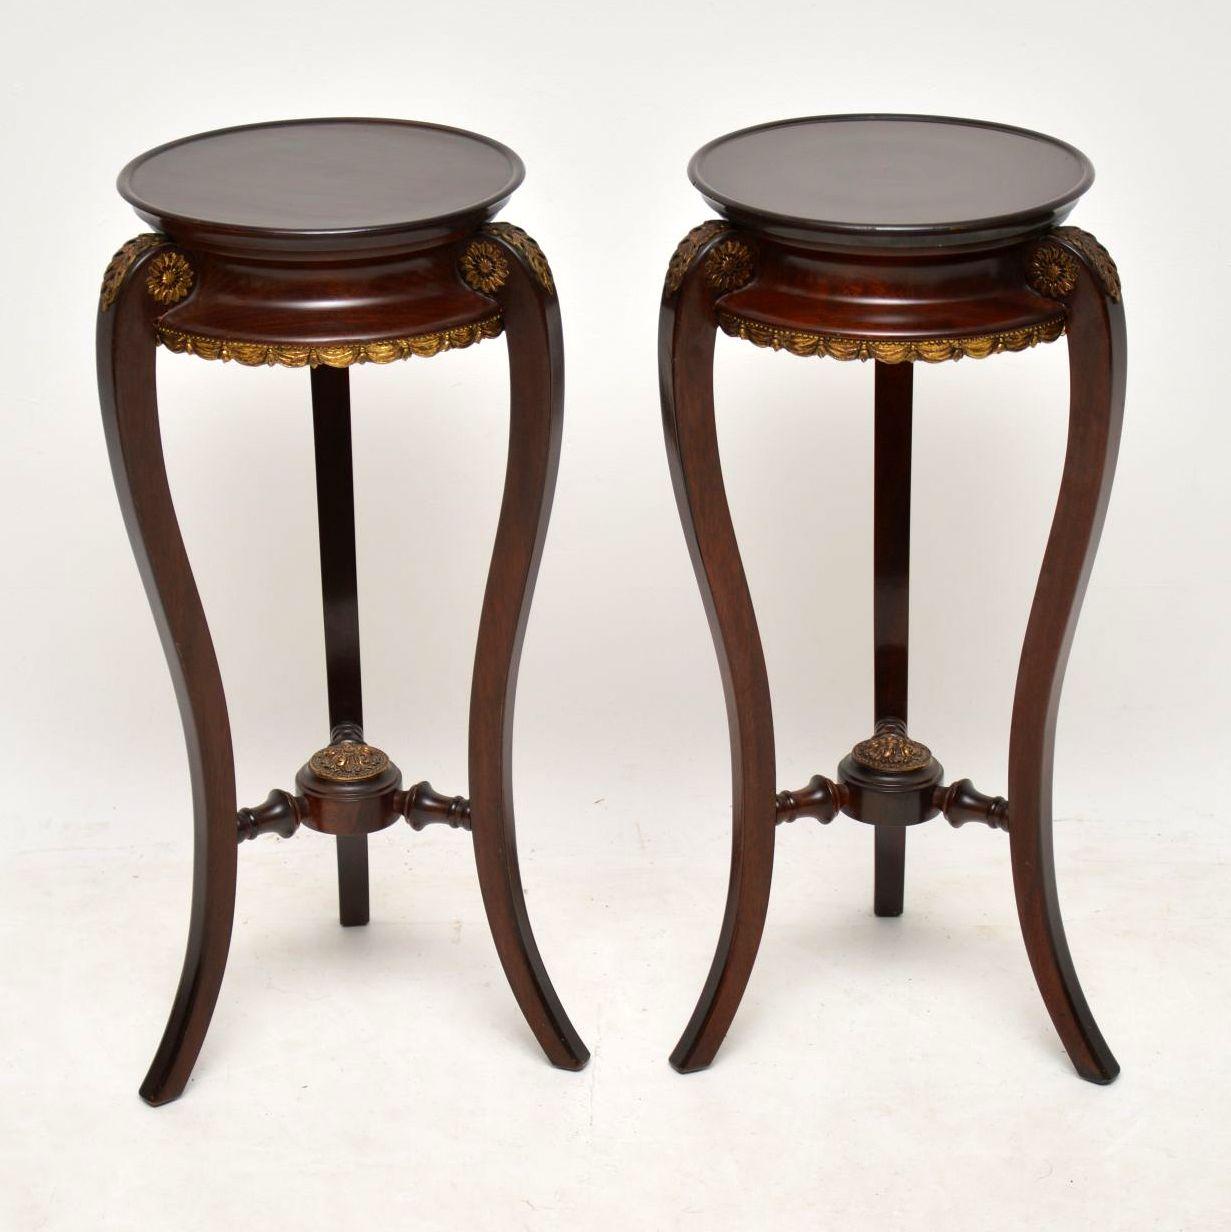 Pair of antique French style mahogany side tables with gilt bronze mounts, dating to around the 1930s-1950s. They are in good original condition and well constructed with the cross stretchers between the legs.

Measures: Width 13 inches, 34